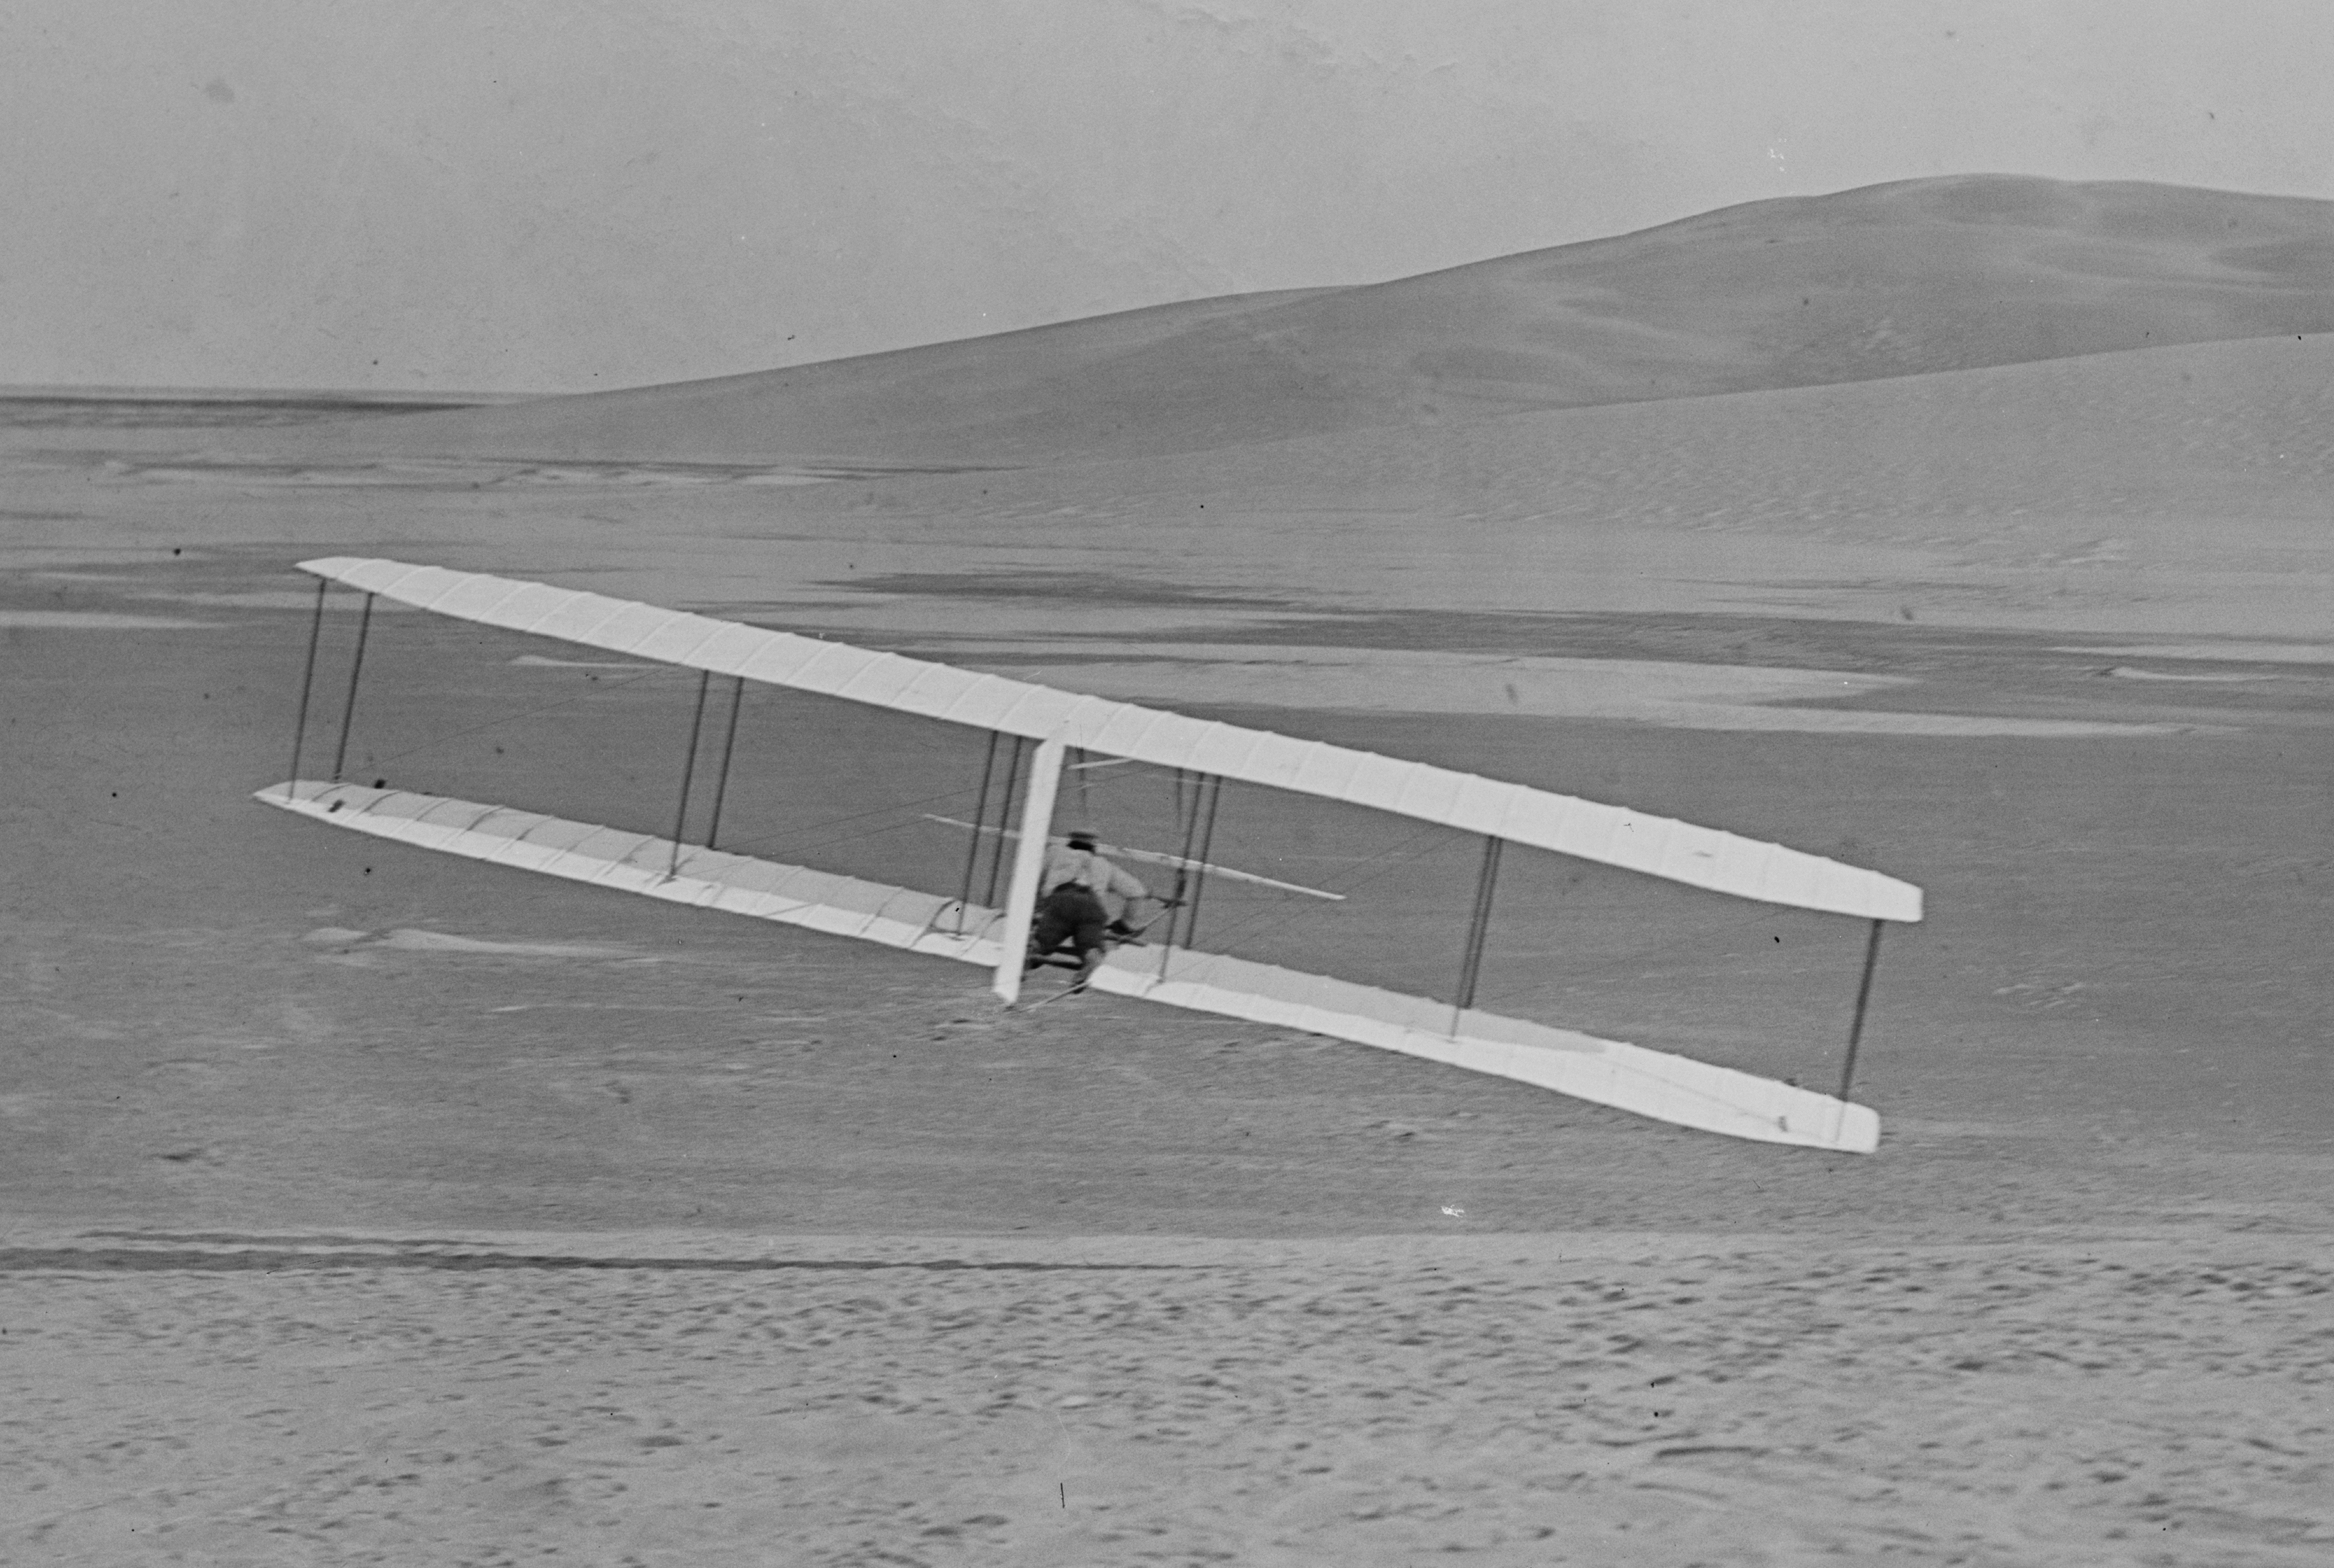 Today is the 112th anniversary of the first Kitty Hawk flights